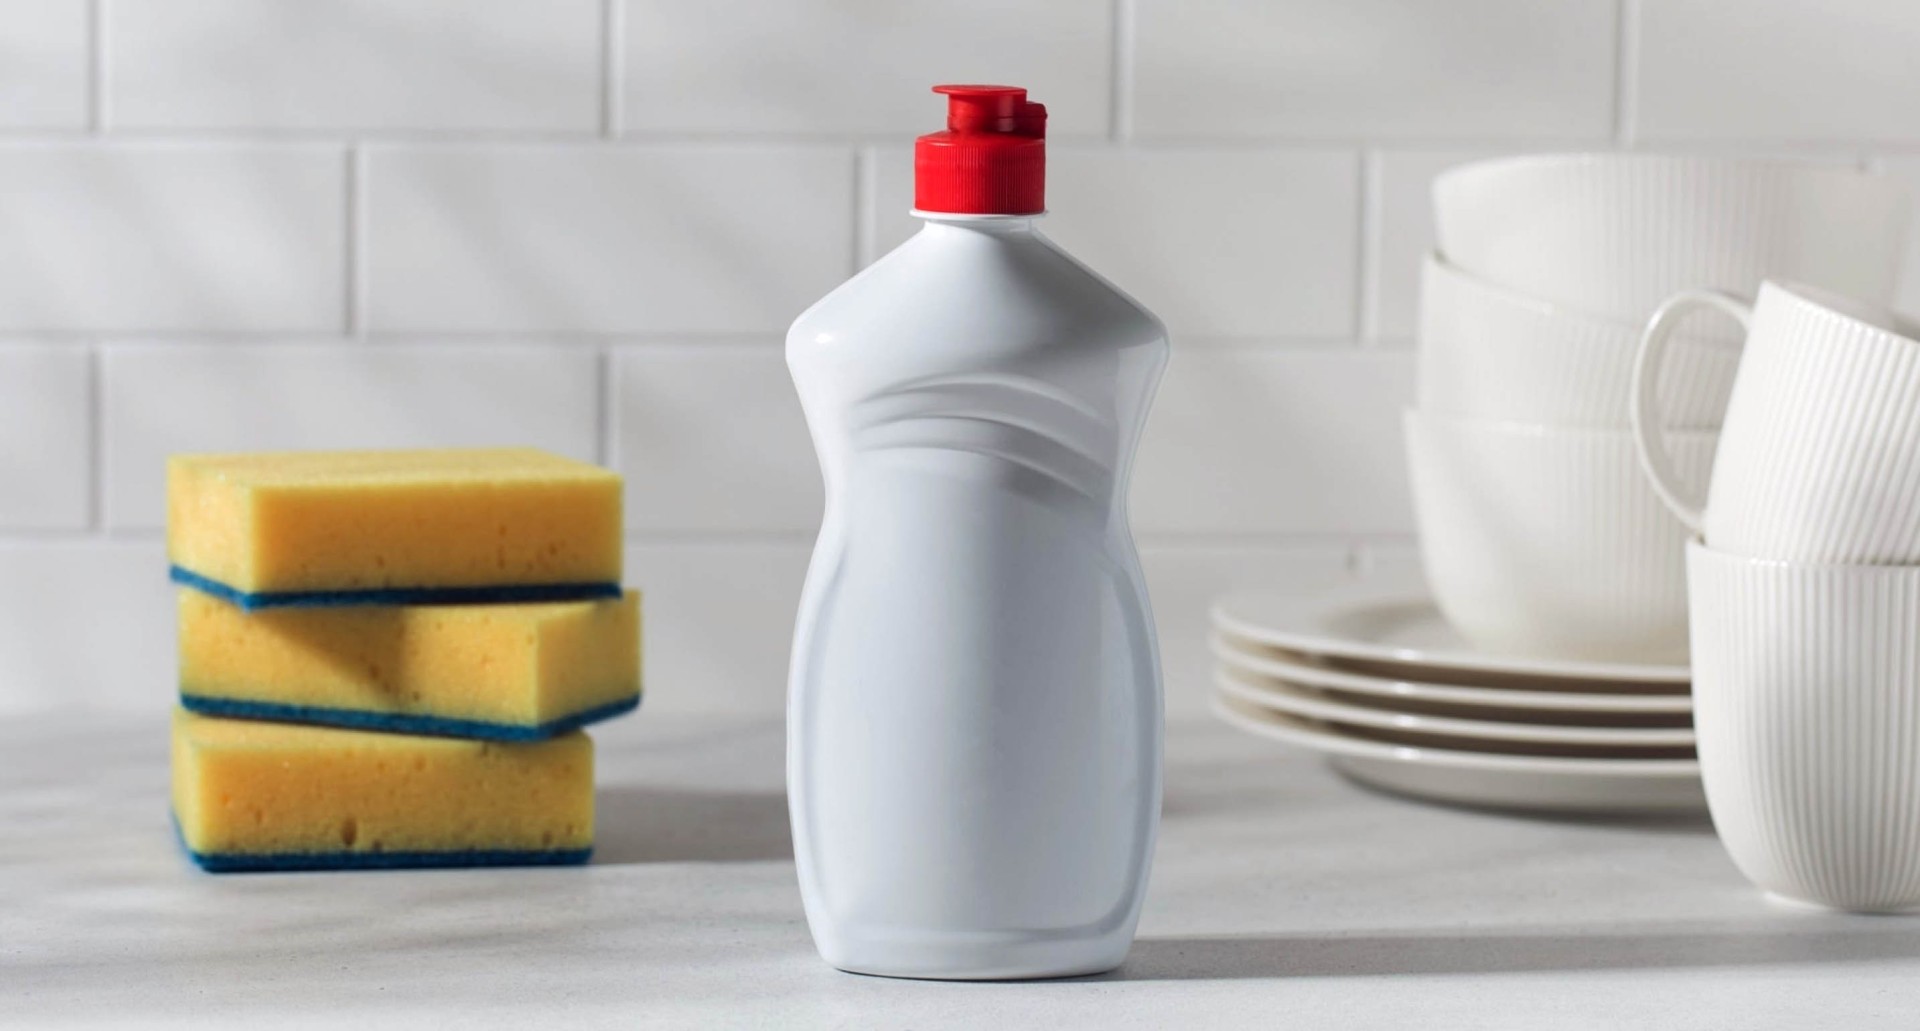 Dish Soap as Laundry Detergent: Good or Bad?